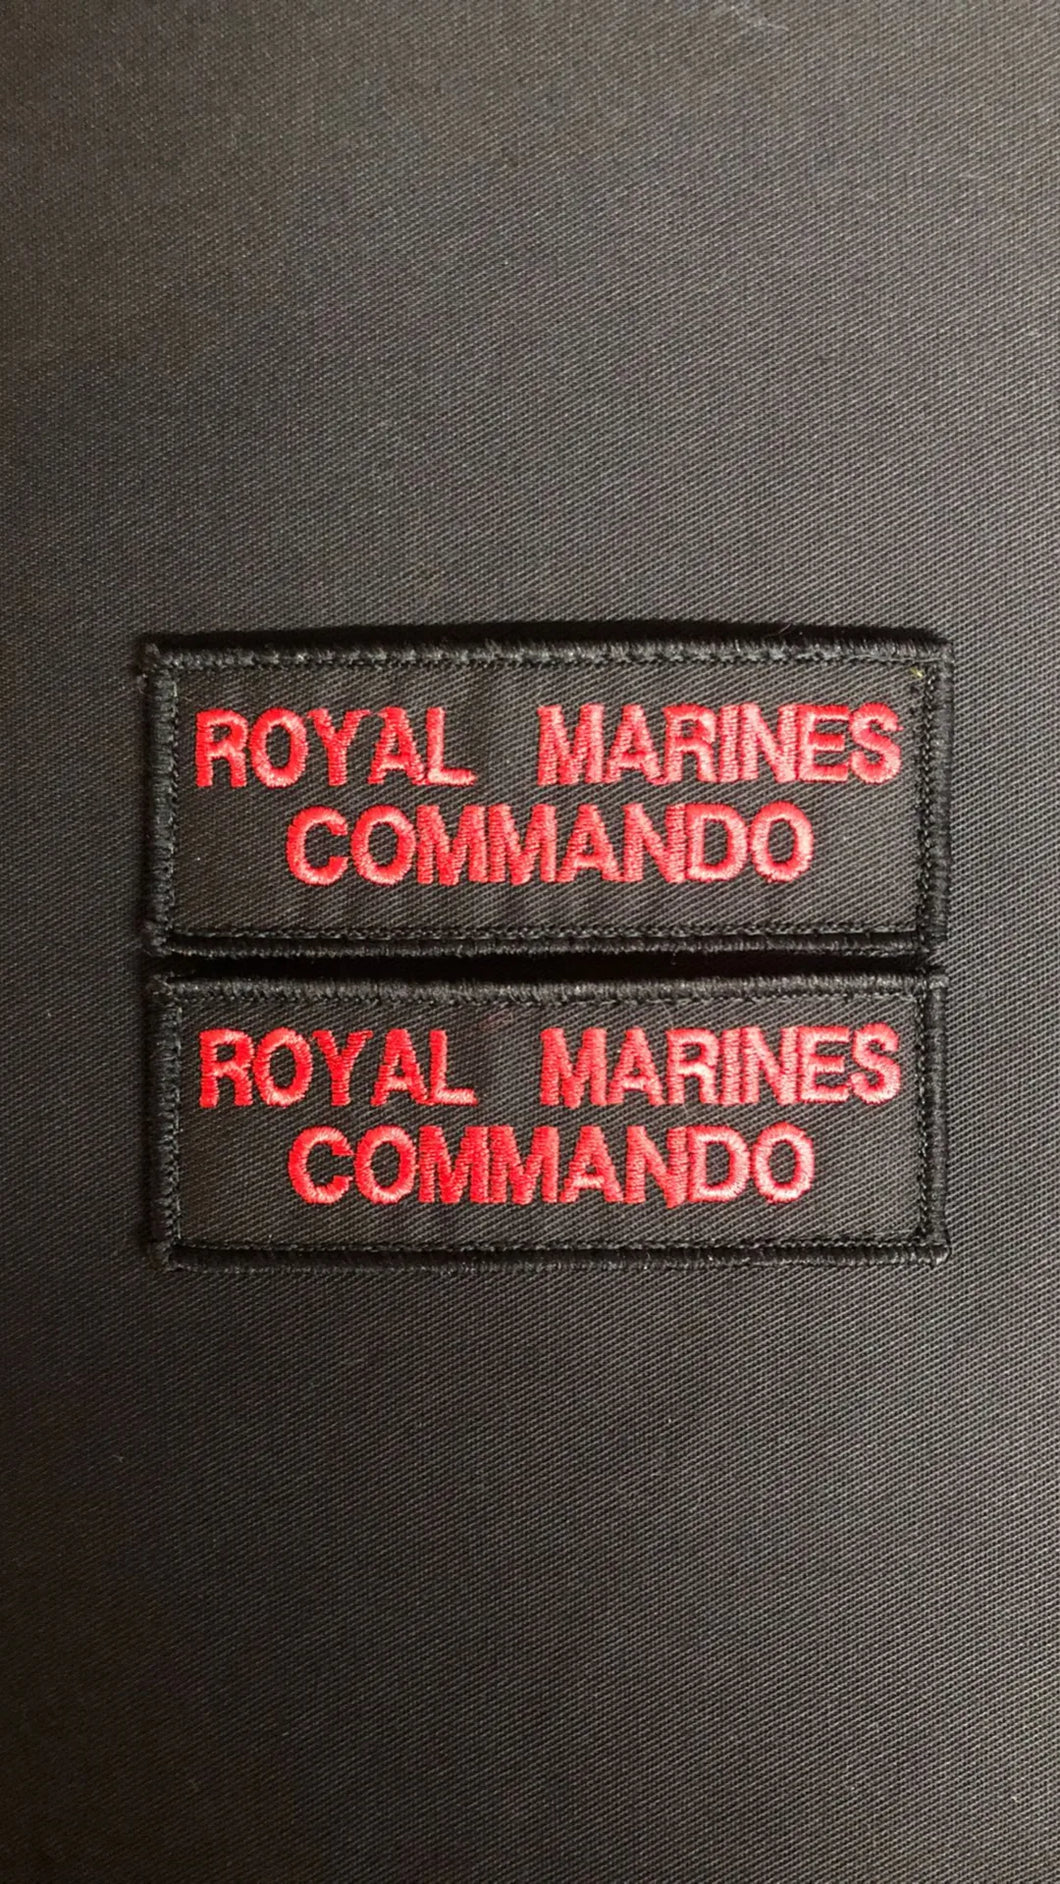 Latest FCF Future Commando Force Patches Subdued Embroidered - shoulder title / mud guards